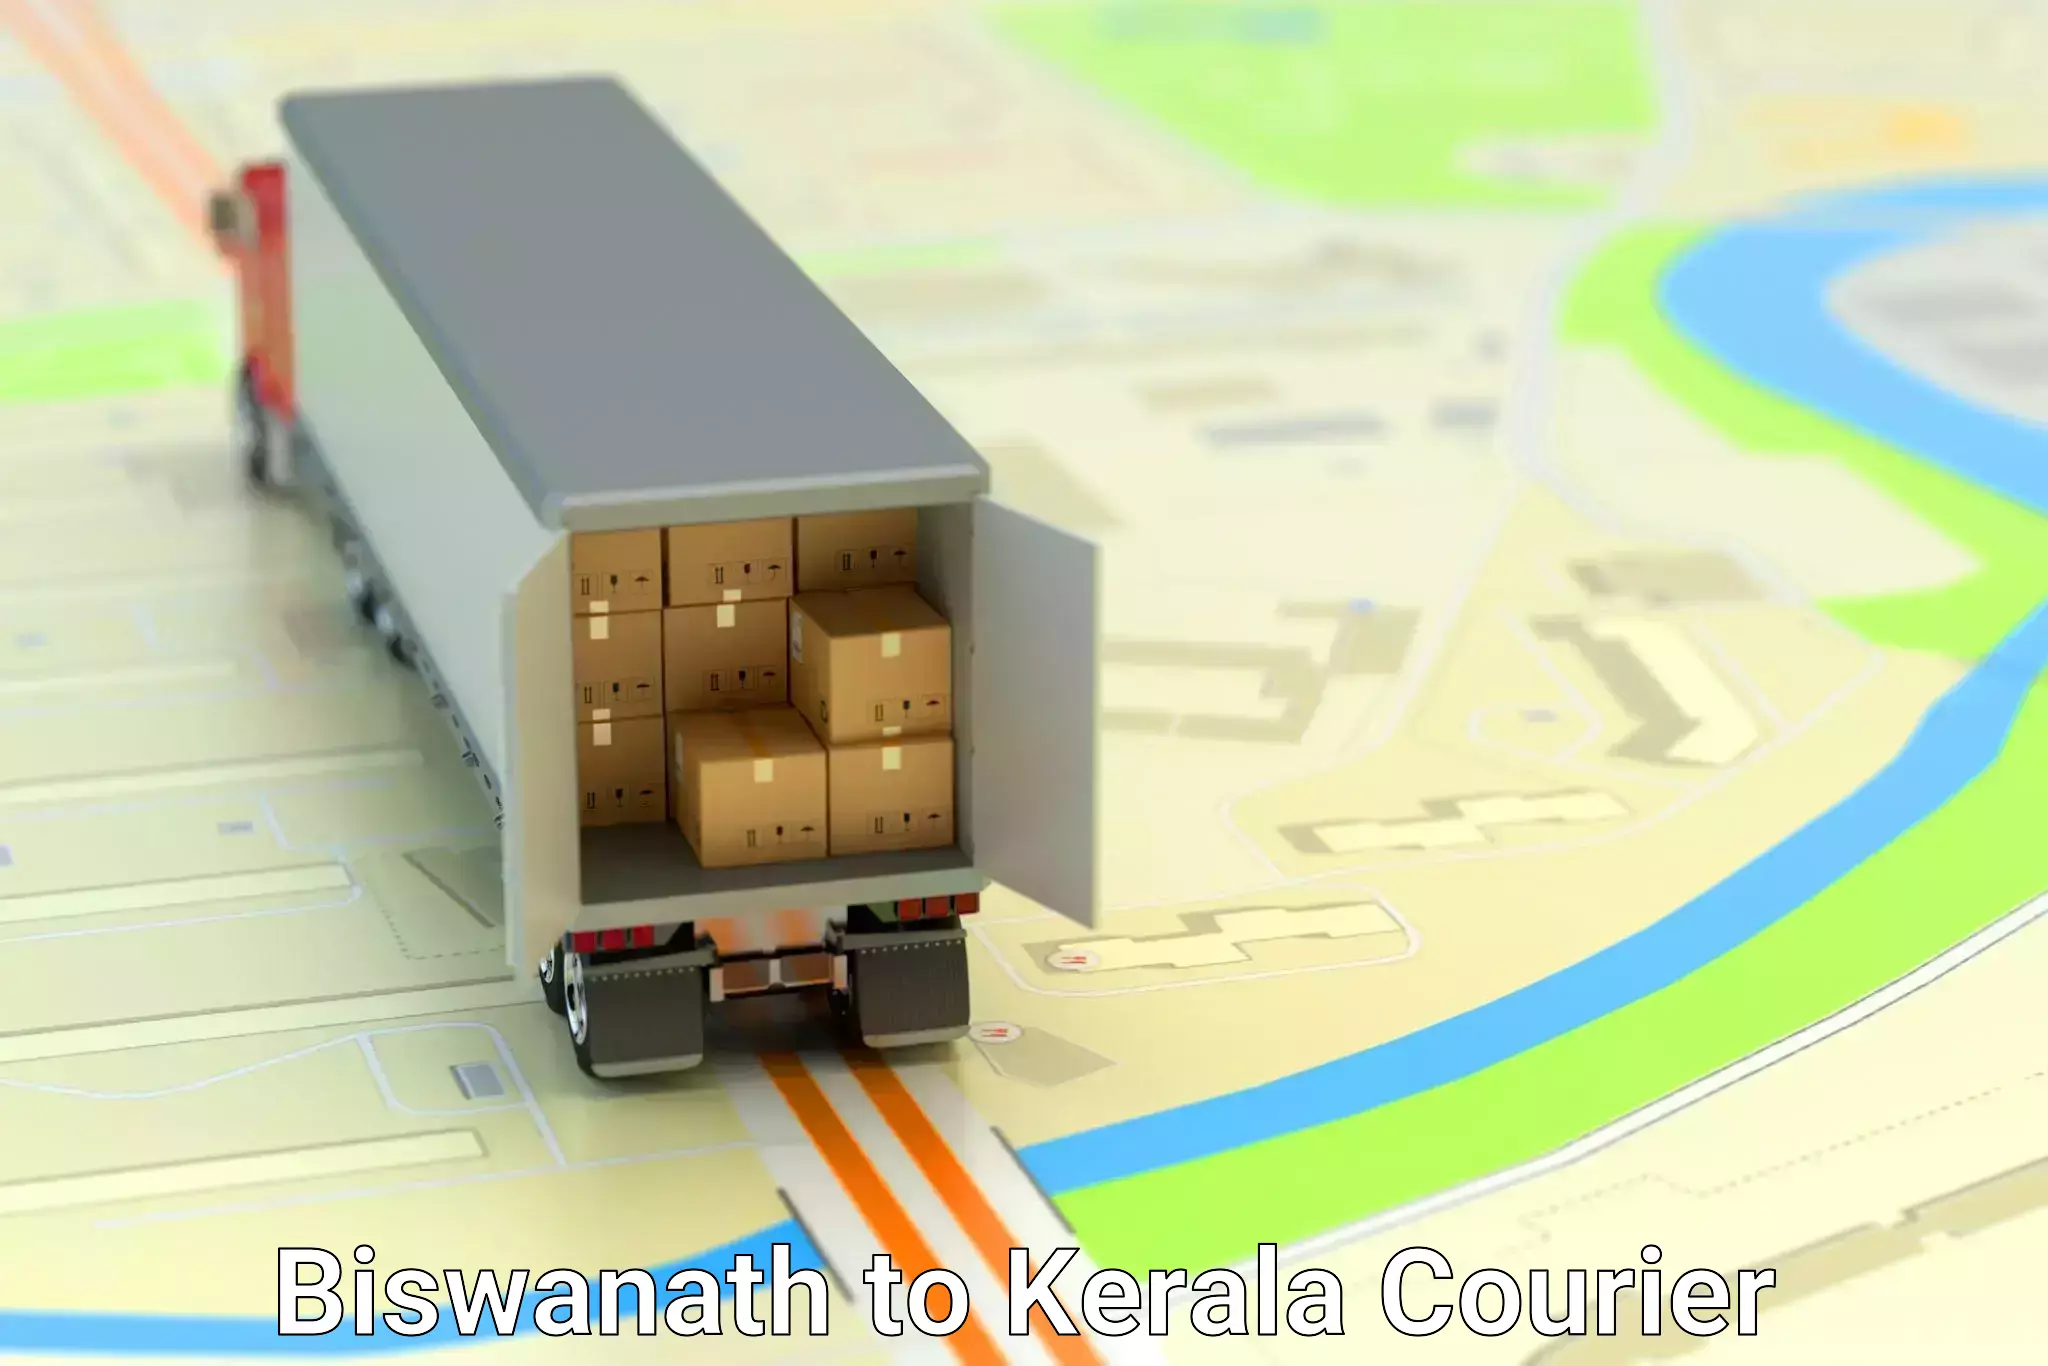 24-hour courier service Biswanath to Kerala